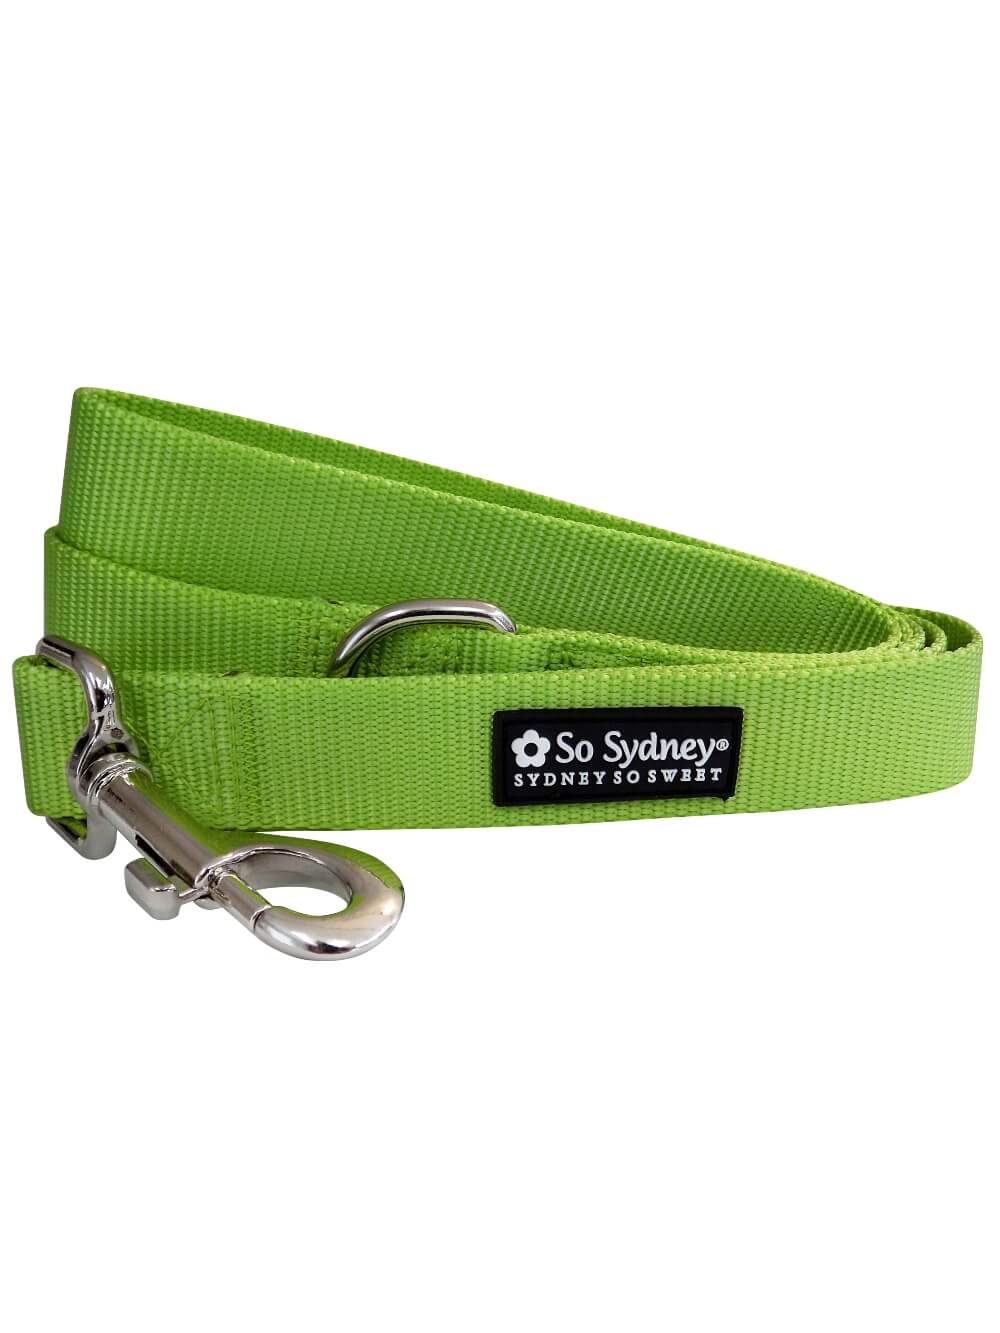 Lime Green - Nylon Dog Leash for Small, Medium, or Large Dogs - Sydney So Sweet